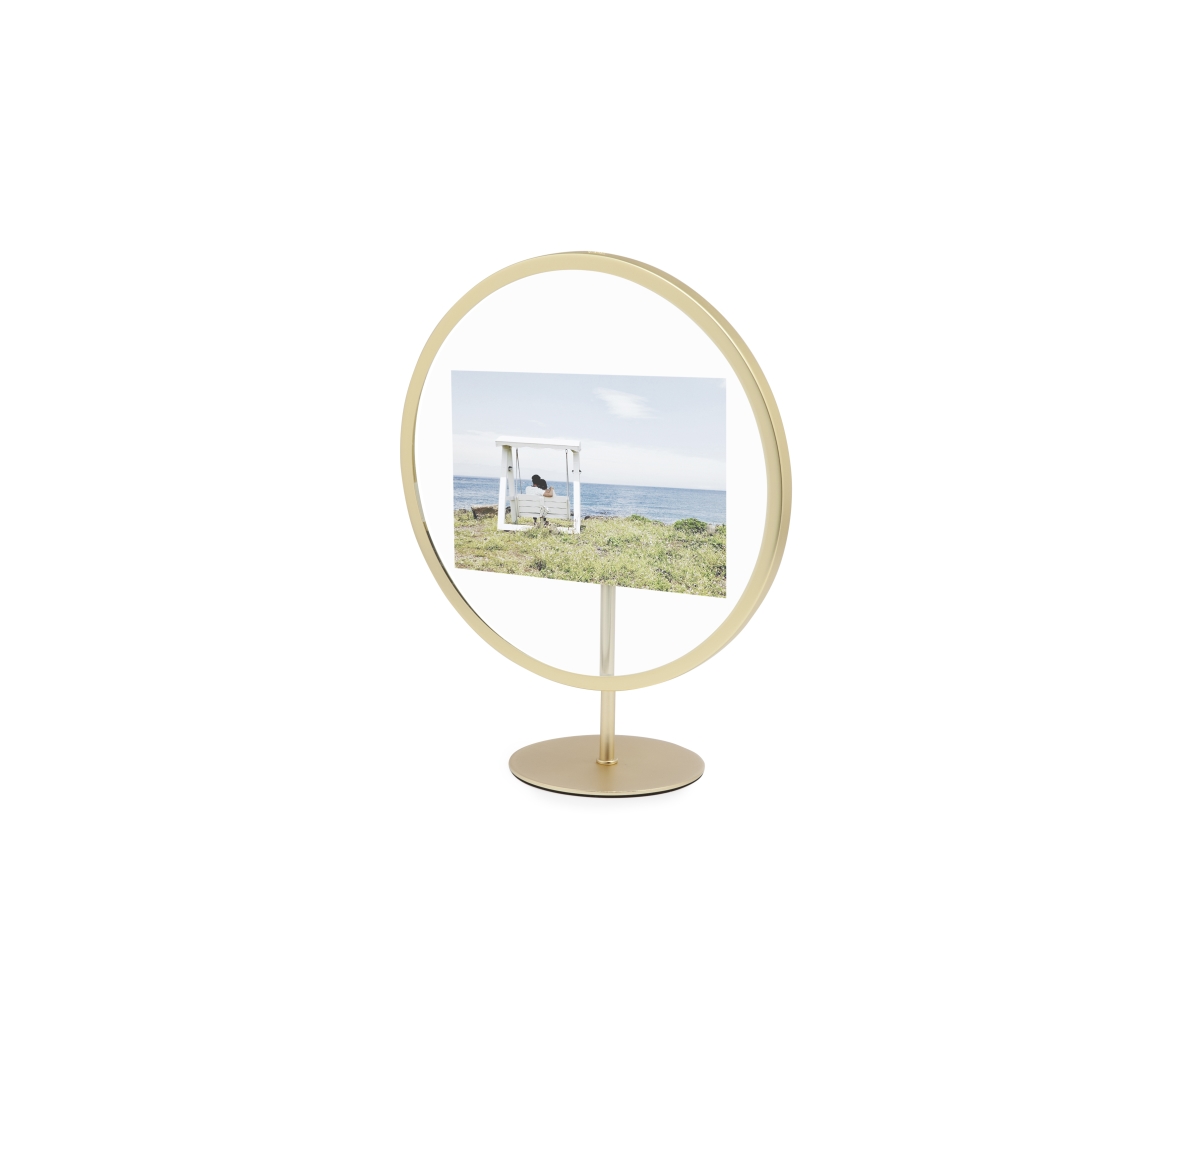 1012271-221 4 X 6 In. Unique Infinity Circular Display Picture Frame For Desk & Wall, Matte Brass